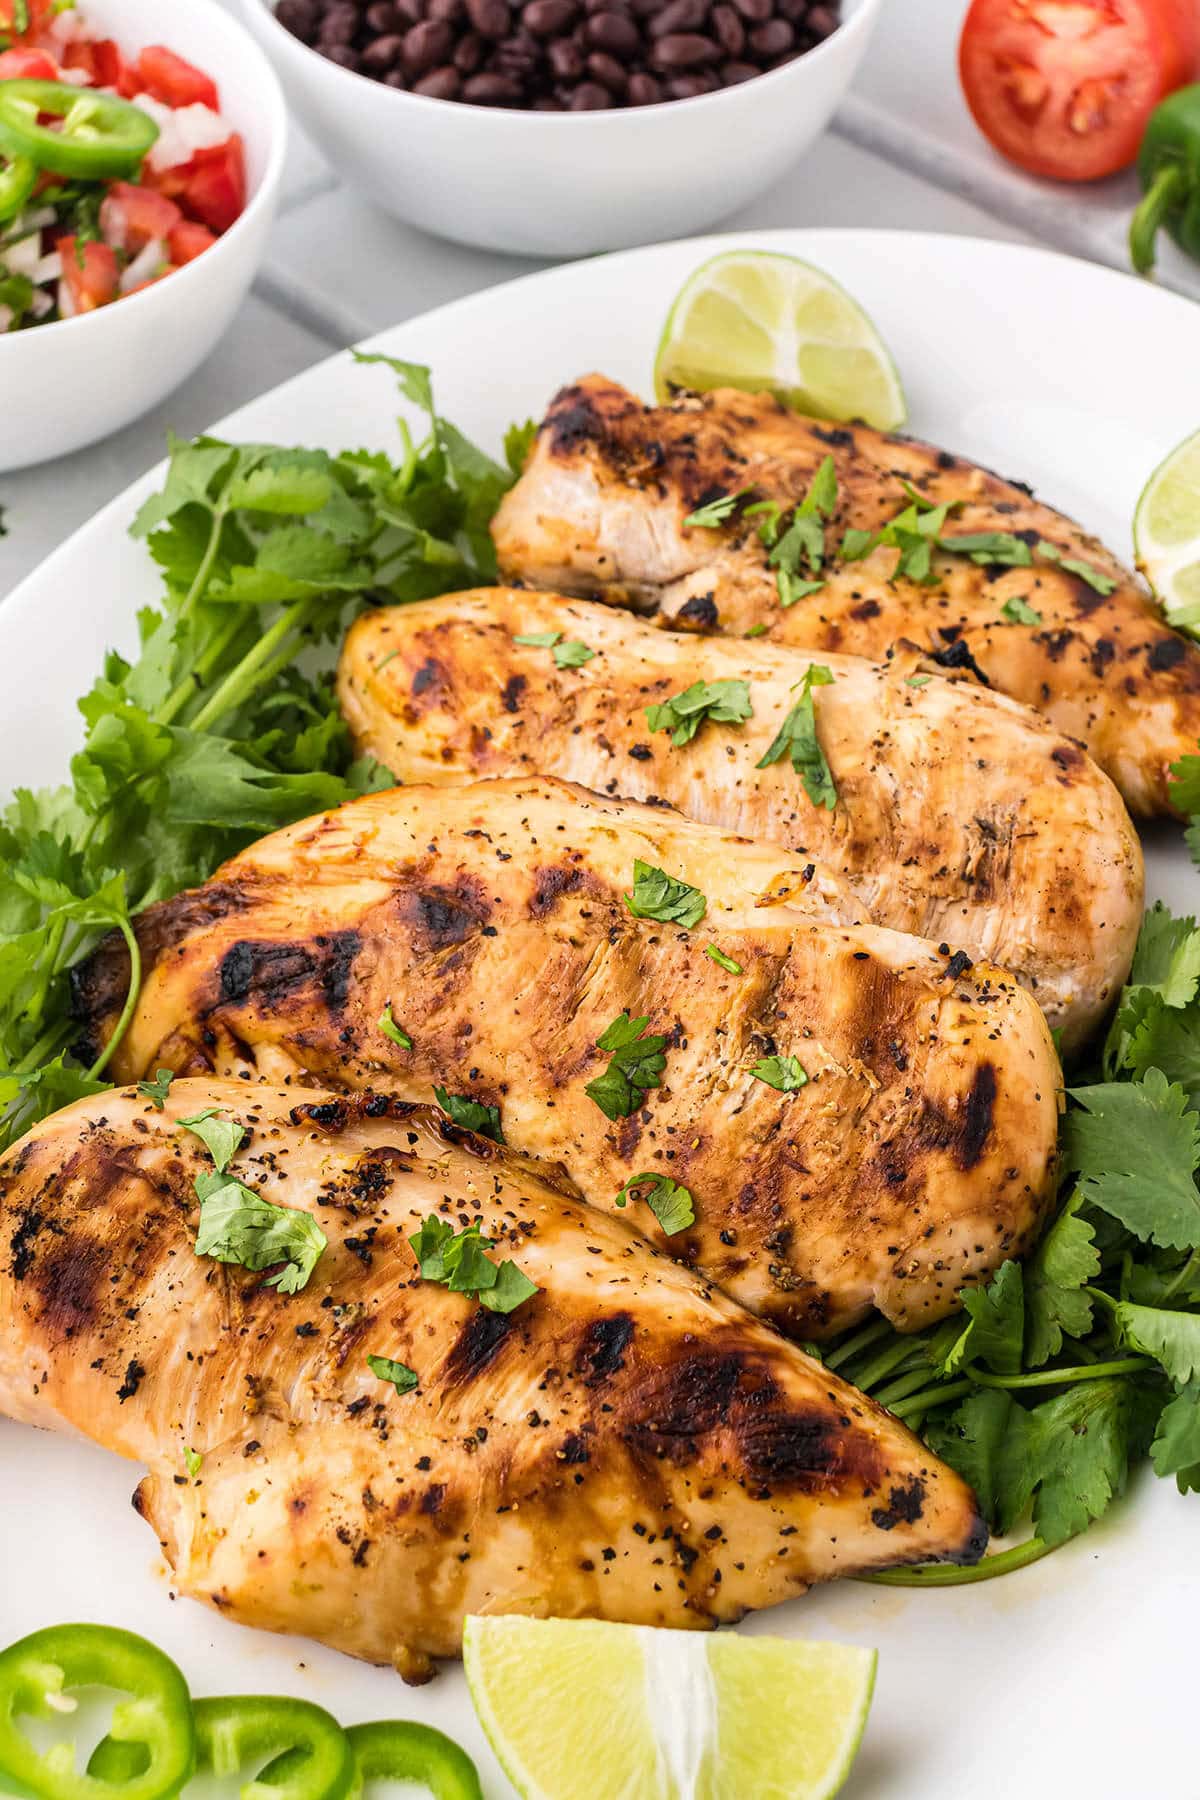 Grilled chicken breast on a platter.